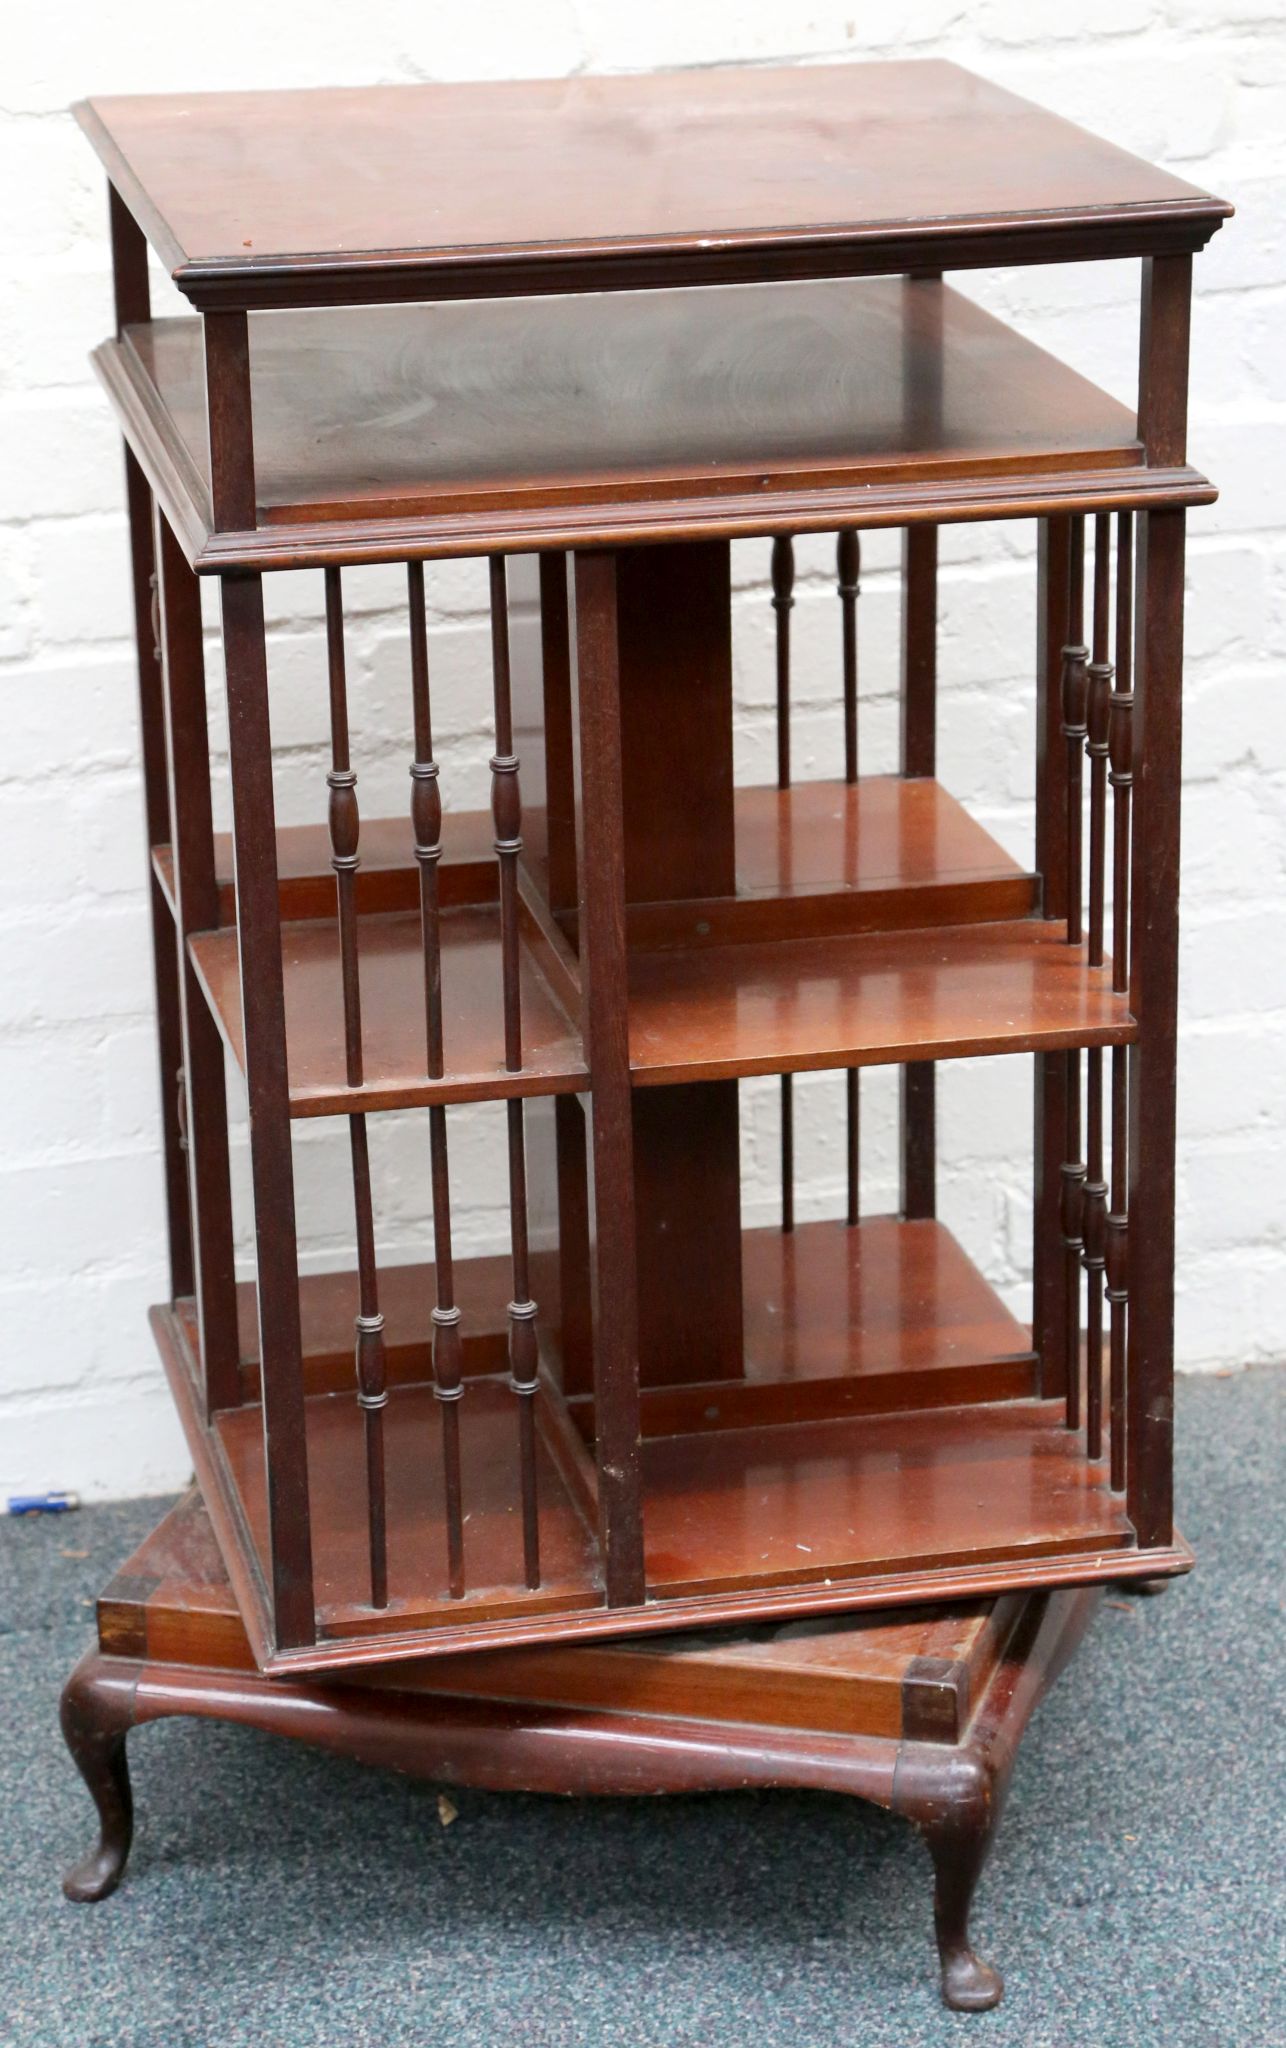 An antique mahogany revolving floor standing bookcase, with turned grill pillars and raised on squat